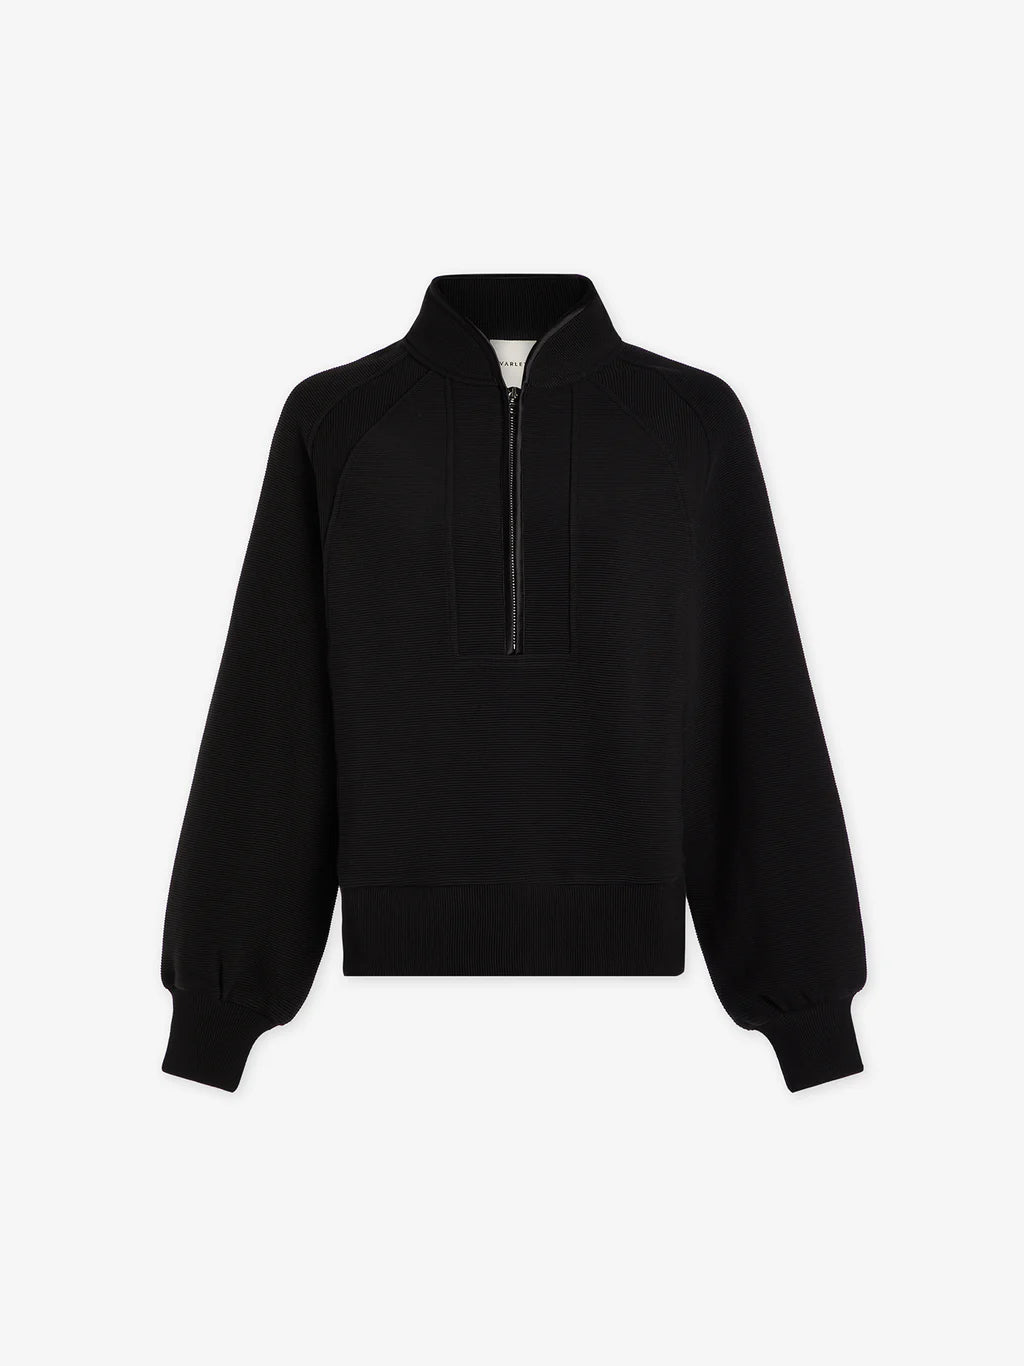 Black half zip top with fine rib details and silver metallic hardware